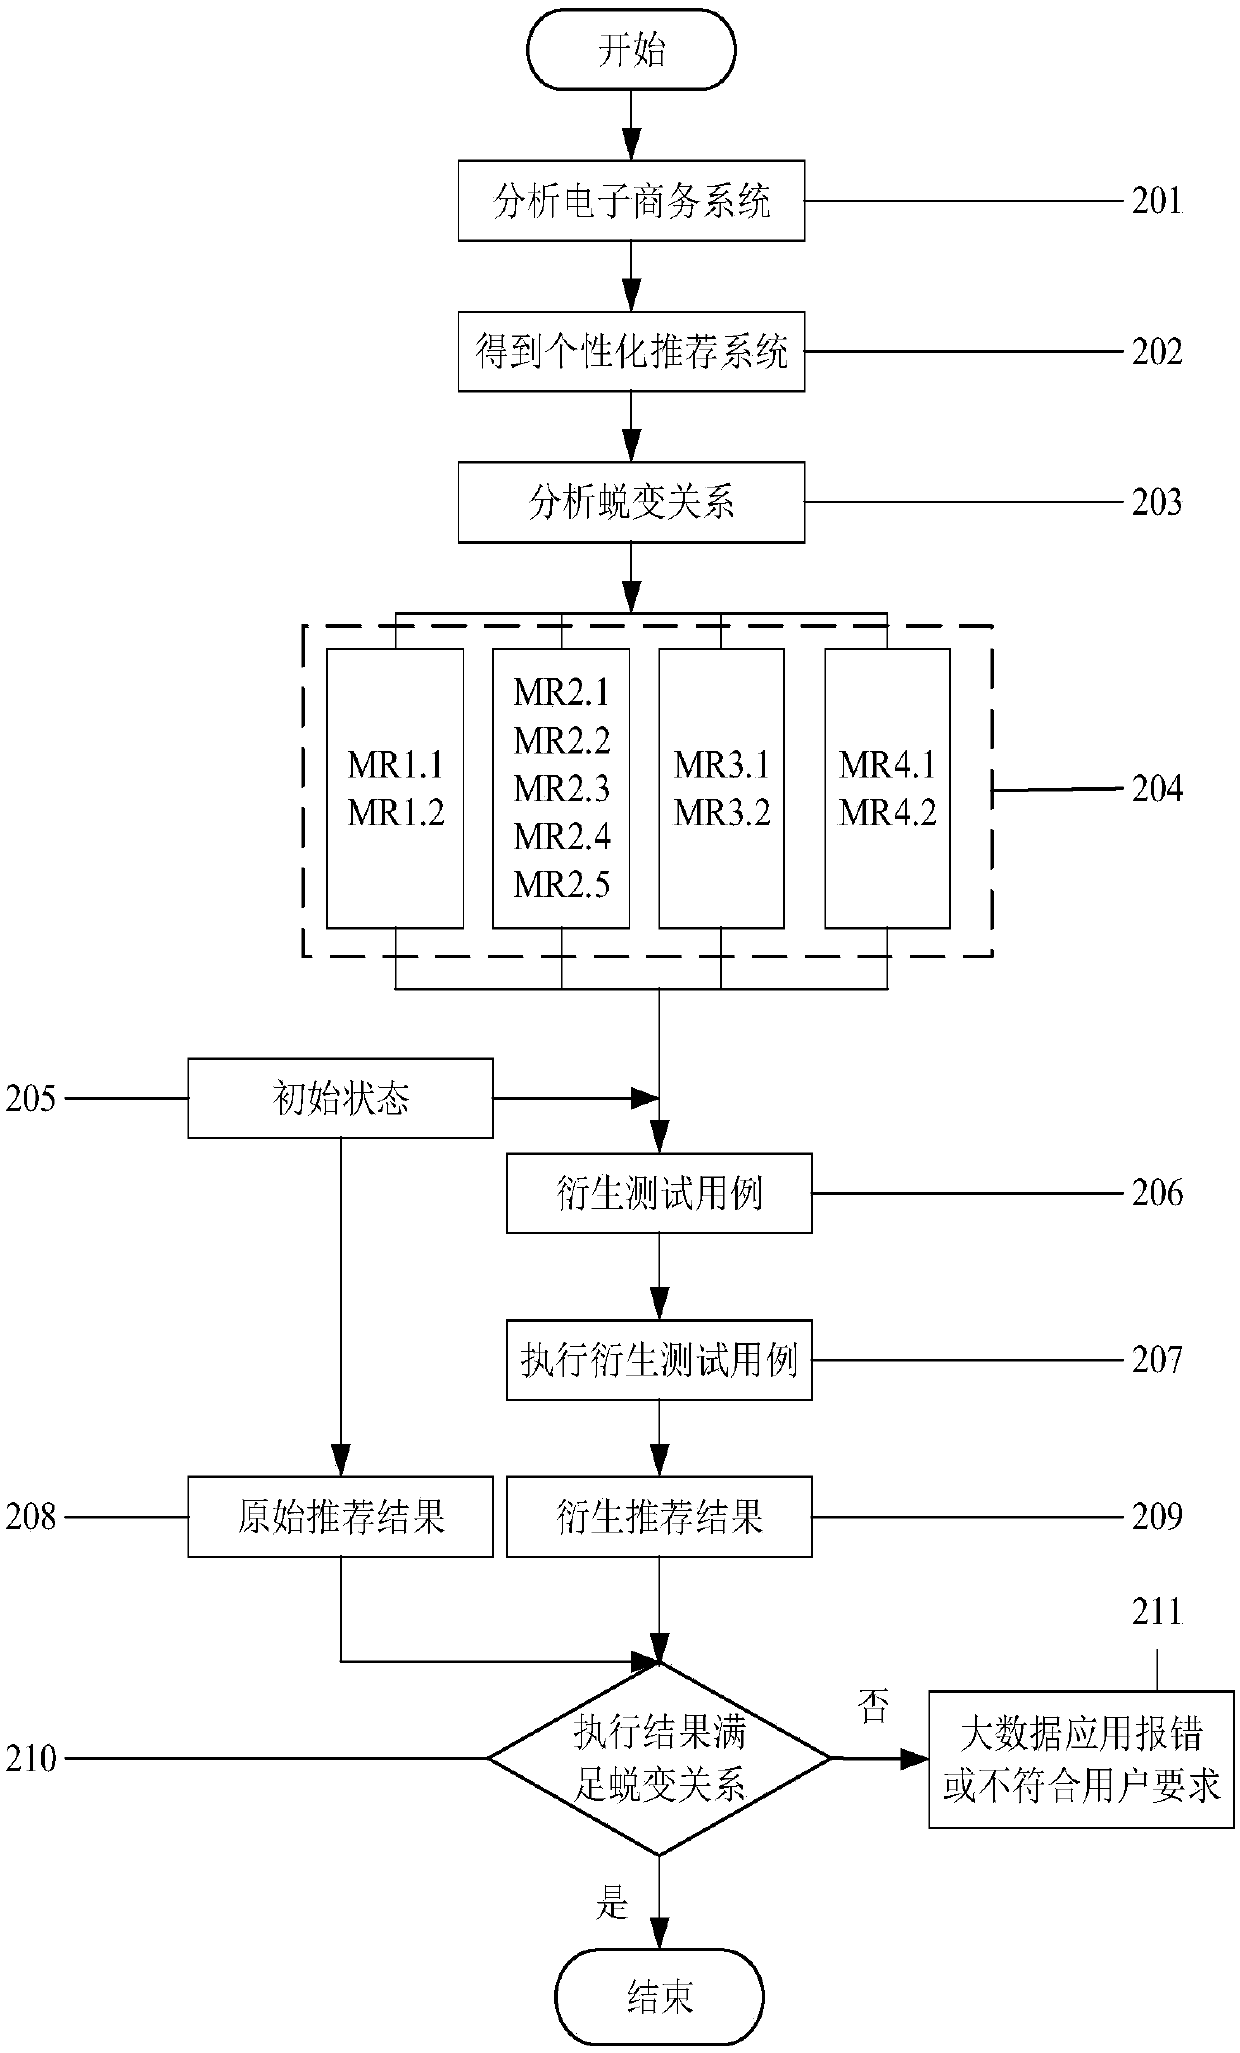 User-oriented big data personalized recommendation system metamorphic test method